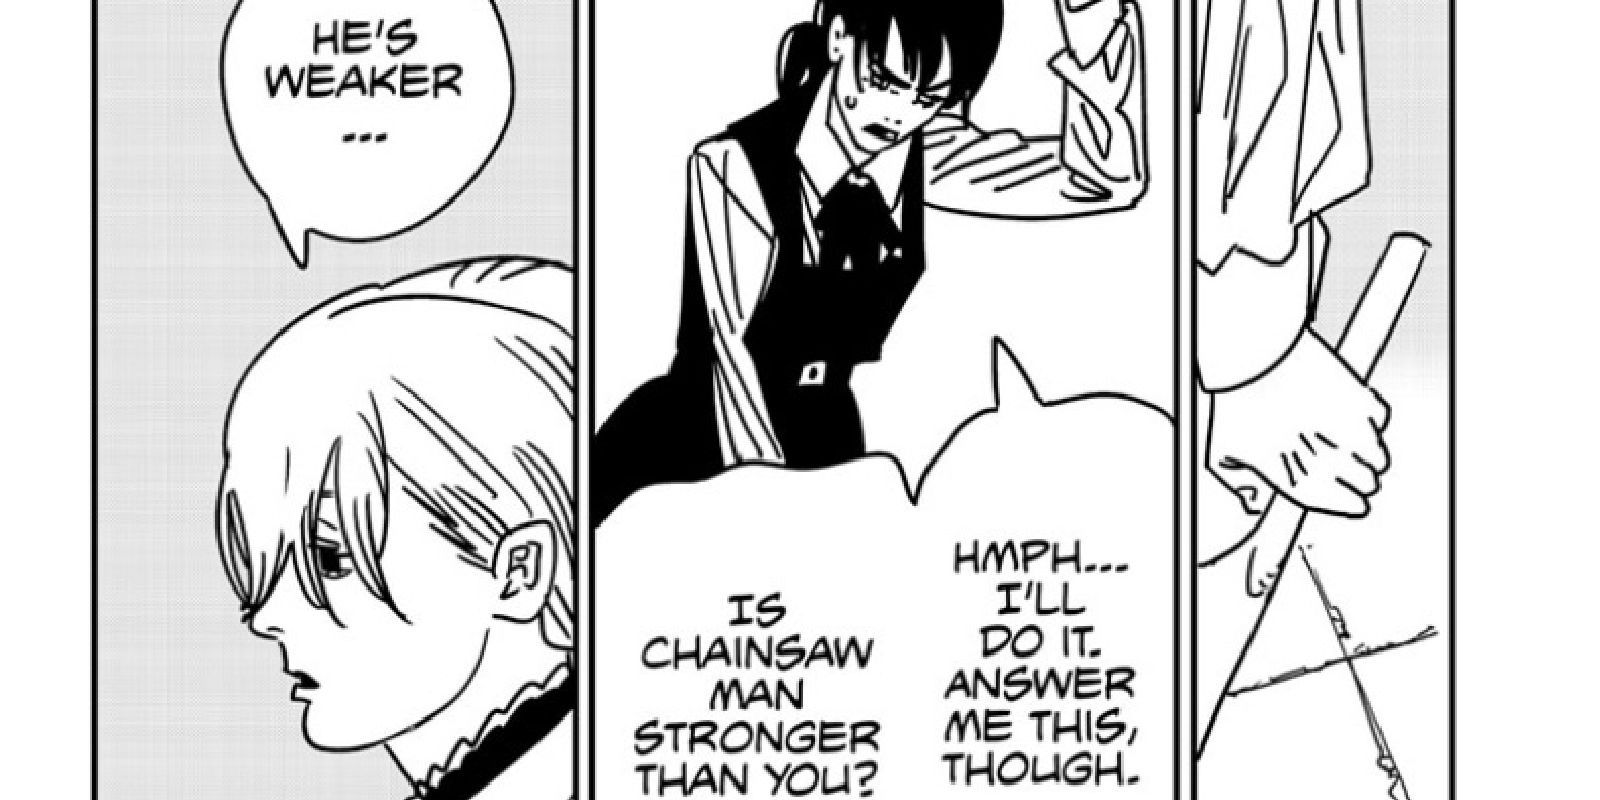 Denji's Search for Nayuta Leads to New Friends in Chainsaw Man Chapter 164